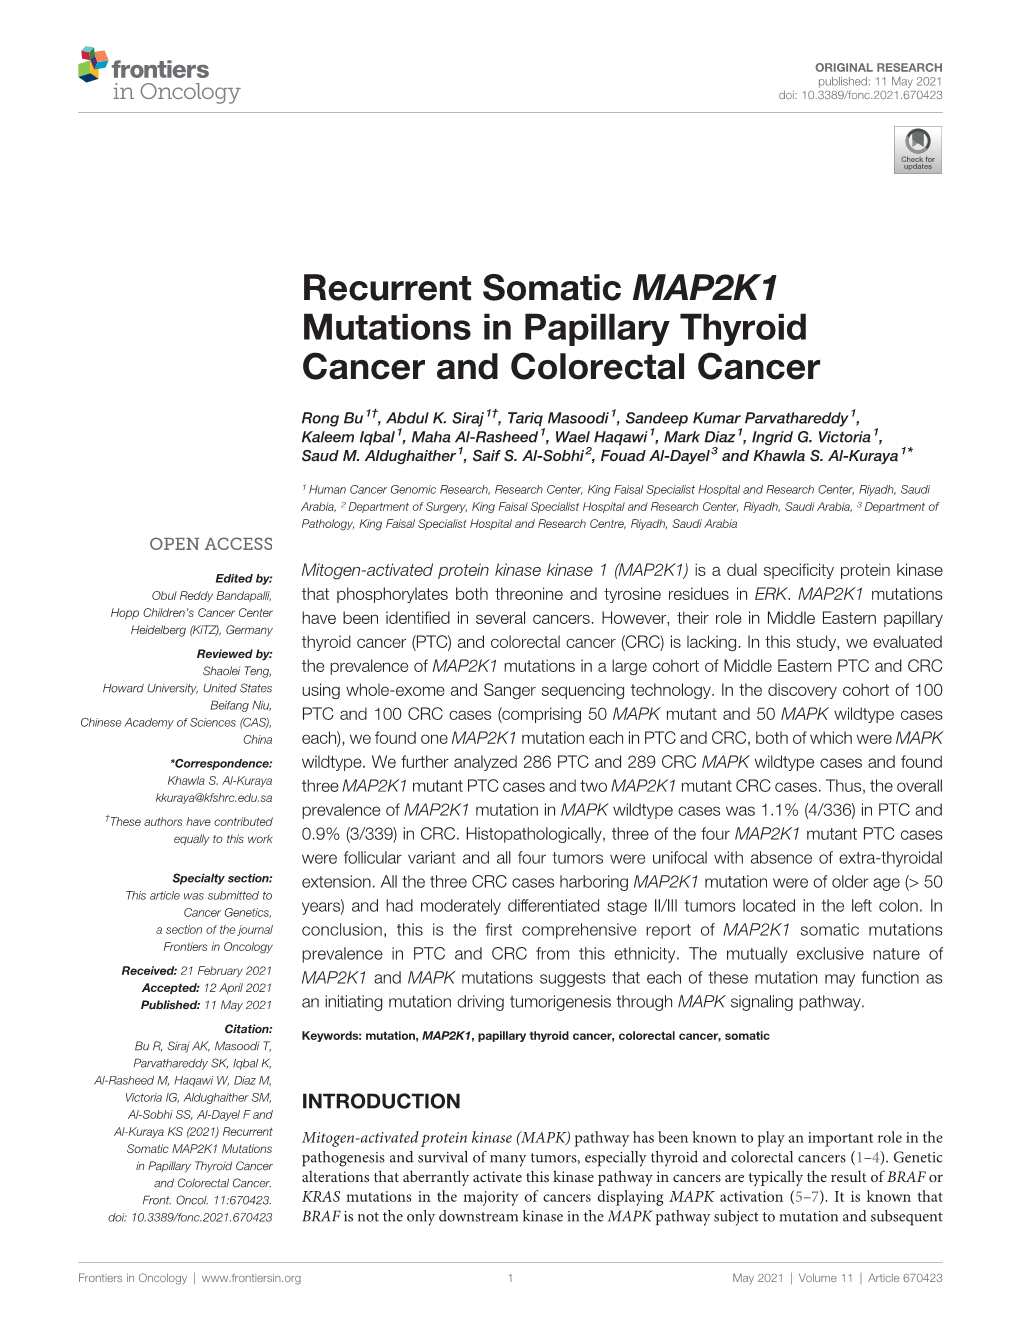 Recurrent Somatic MAP2K1 Mutations in Papillary Thyroid Cancer and Colorectal Cancer